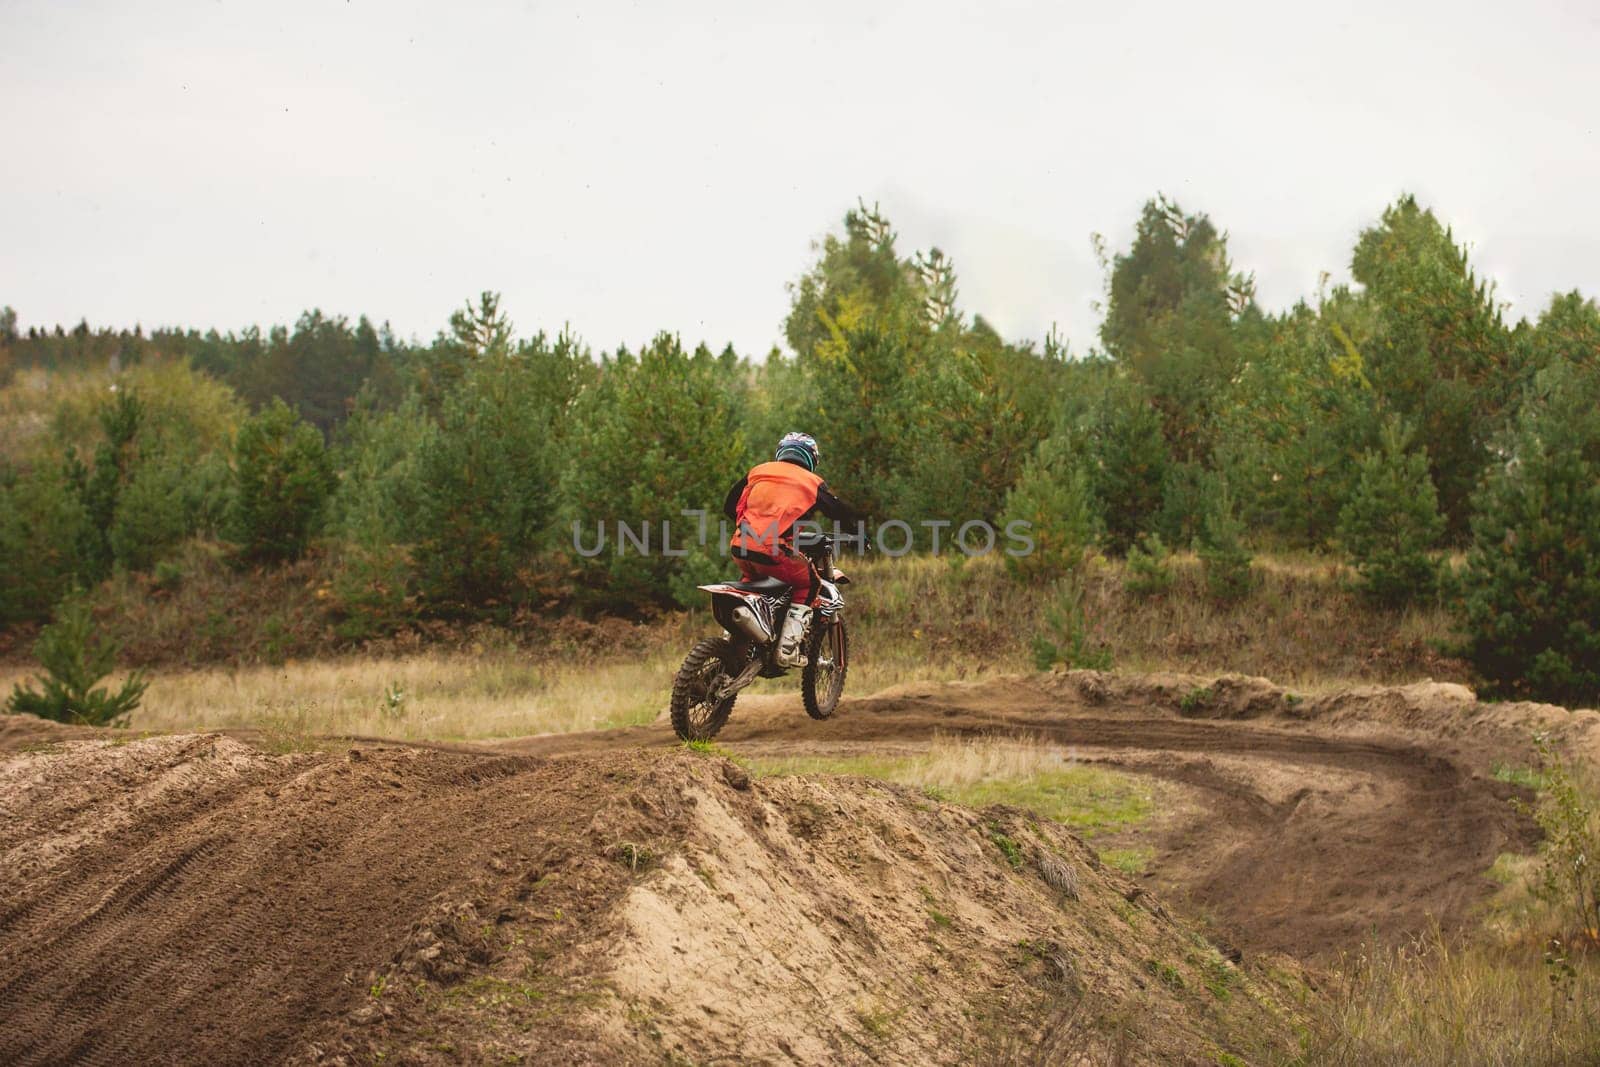 24 september 2016 - Volgsk, Russia, MX moto cross racing - competition near districts by Studia72